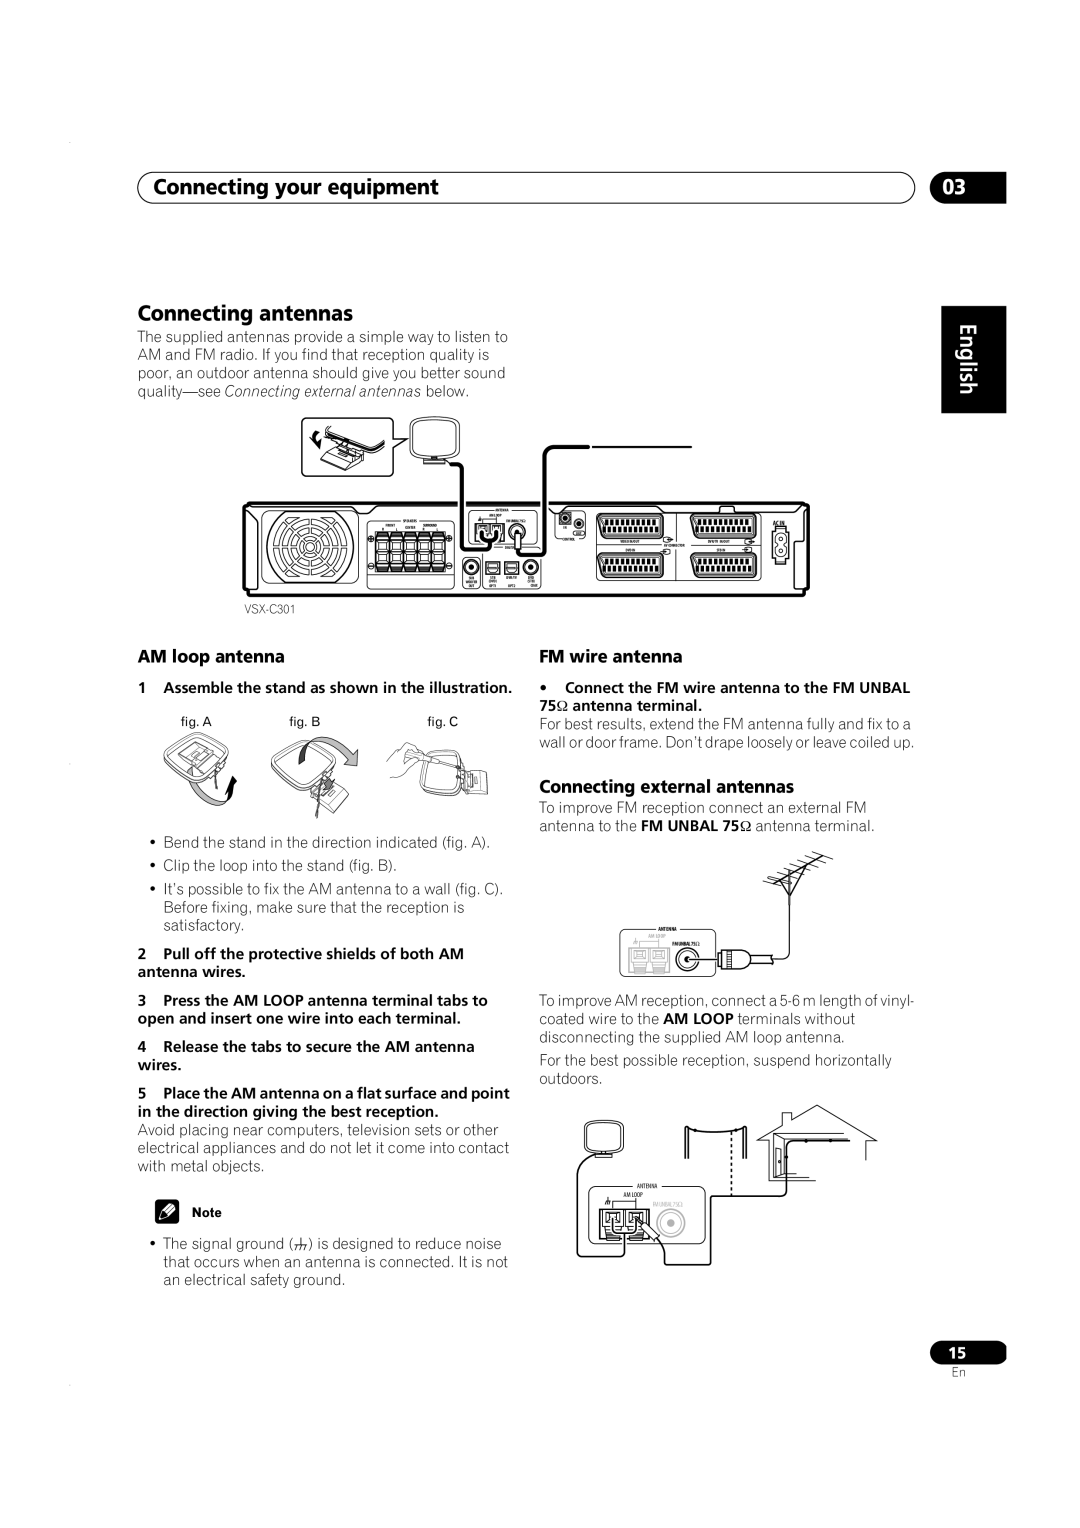 Pioneer VSX-C301 Connecting your equipment Connecting antennas, English, Assemble the stand as shown in the illustration 